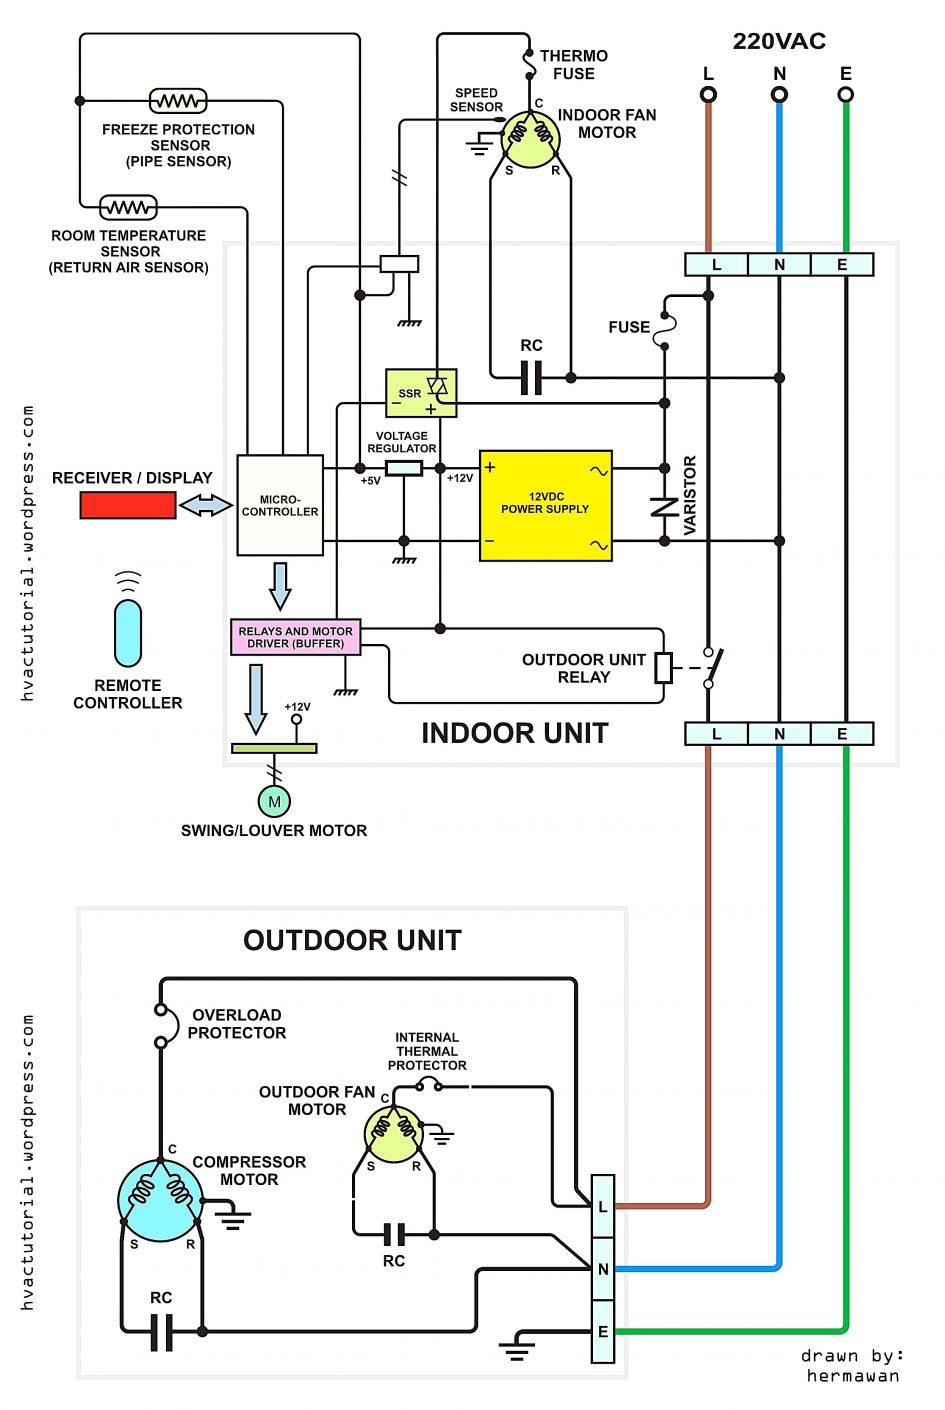 Home Plumbing System. Trane Chiller Piping Diagram: Hvac Chillers - Trane Heat Pump Wiring Diagram